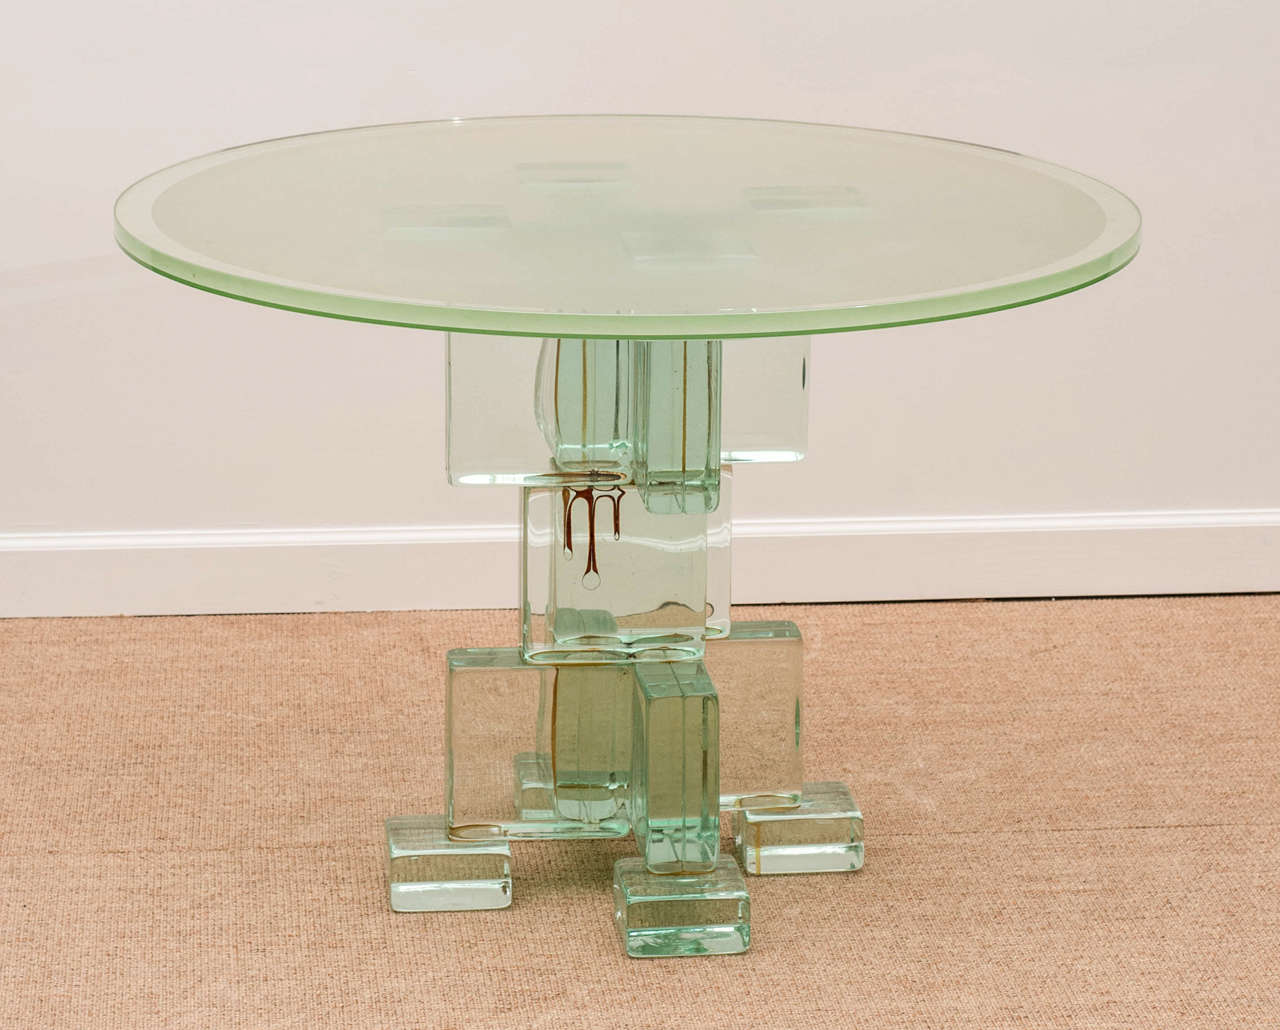 A unusual vintage glass center table with a block work base.

View our complete collection @ www.hollisandknight.com.